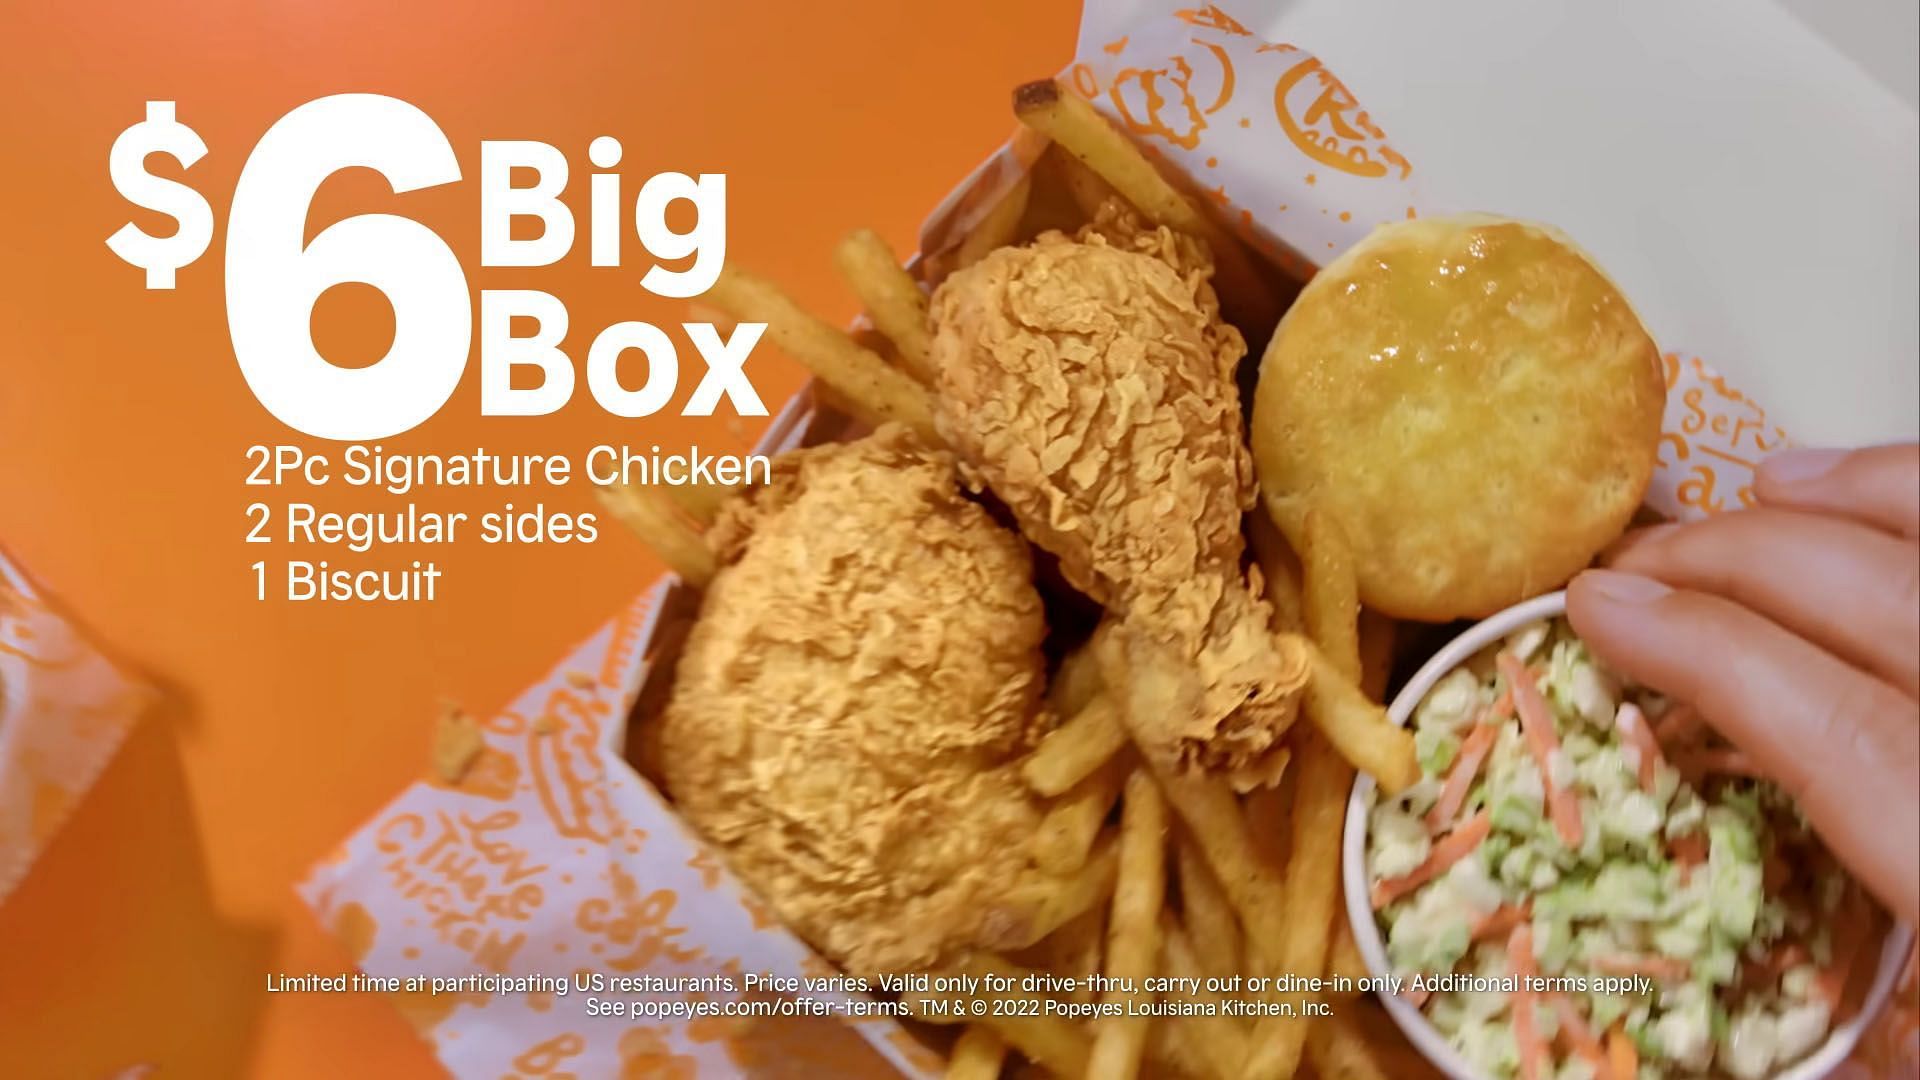 Promotional material for Big Box Deal (Image via YouTube/@Popeyes)